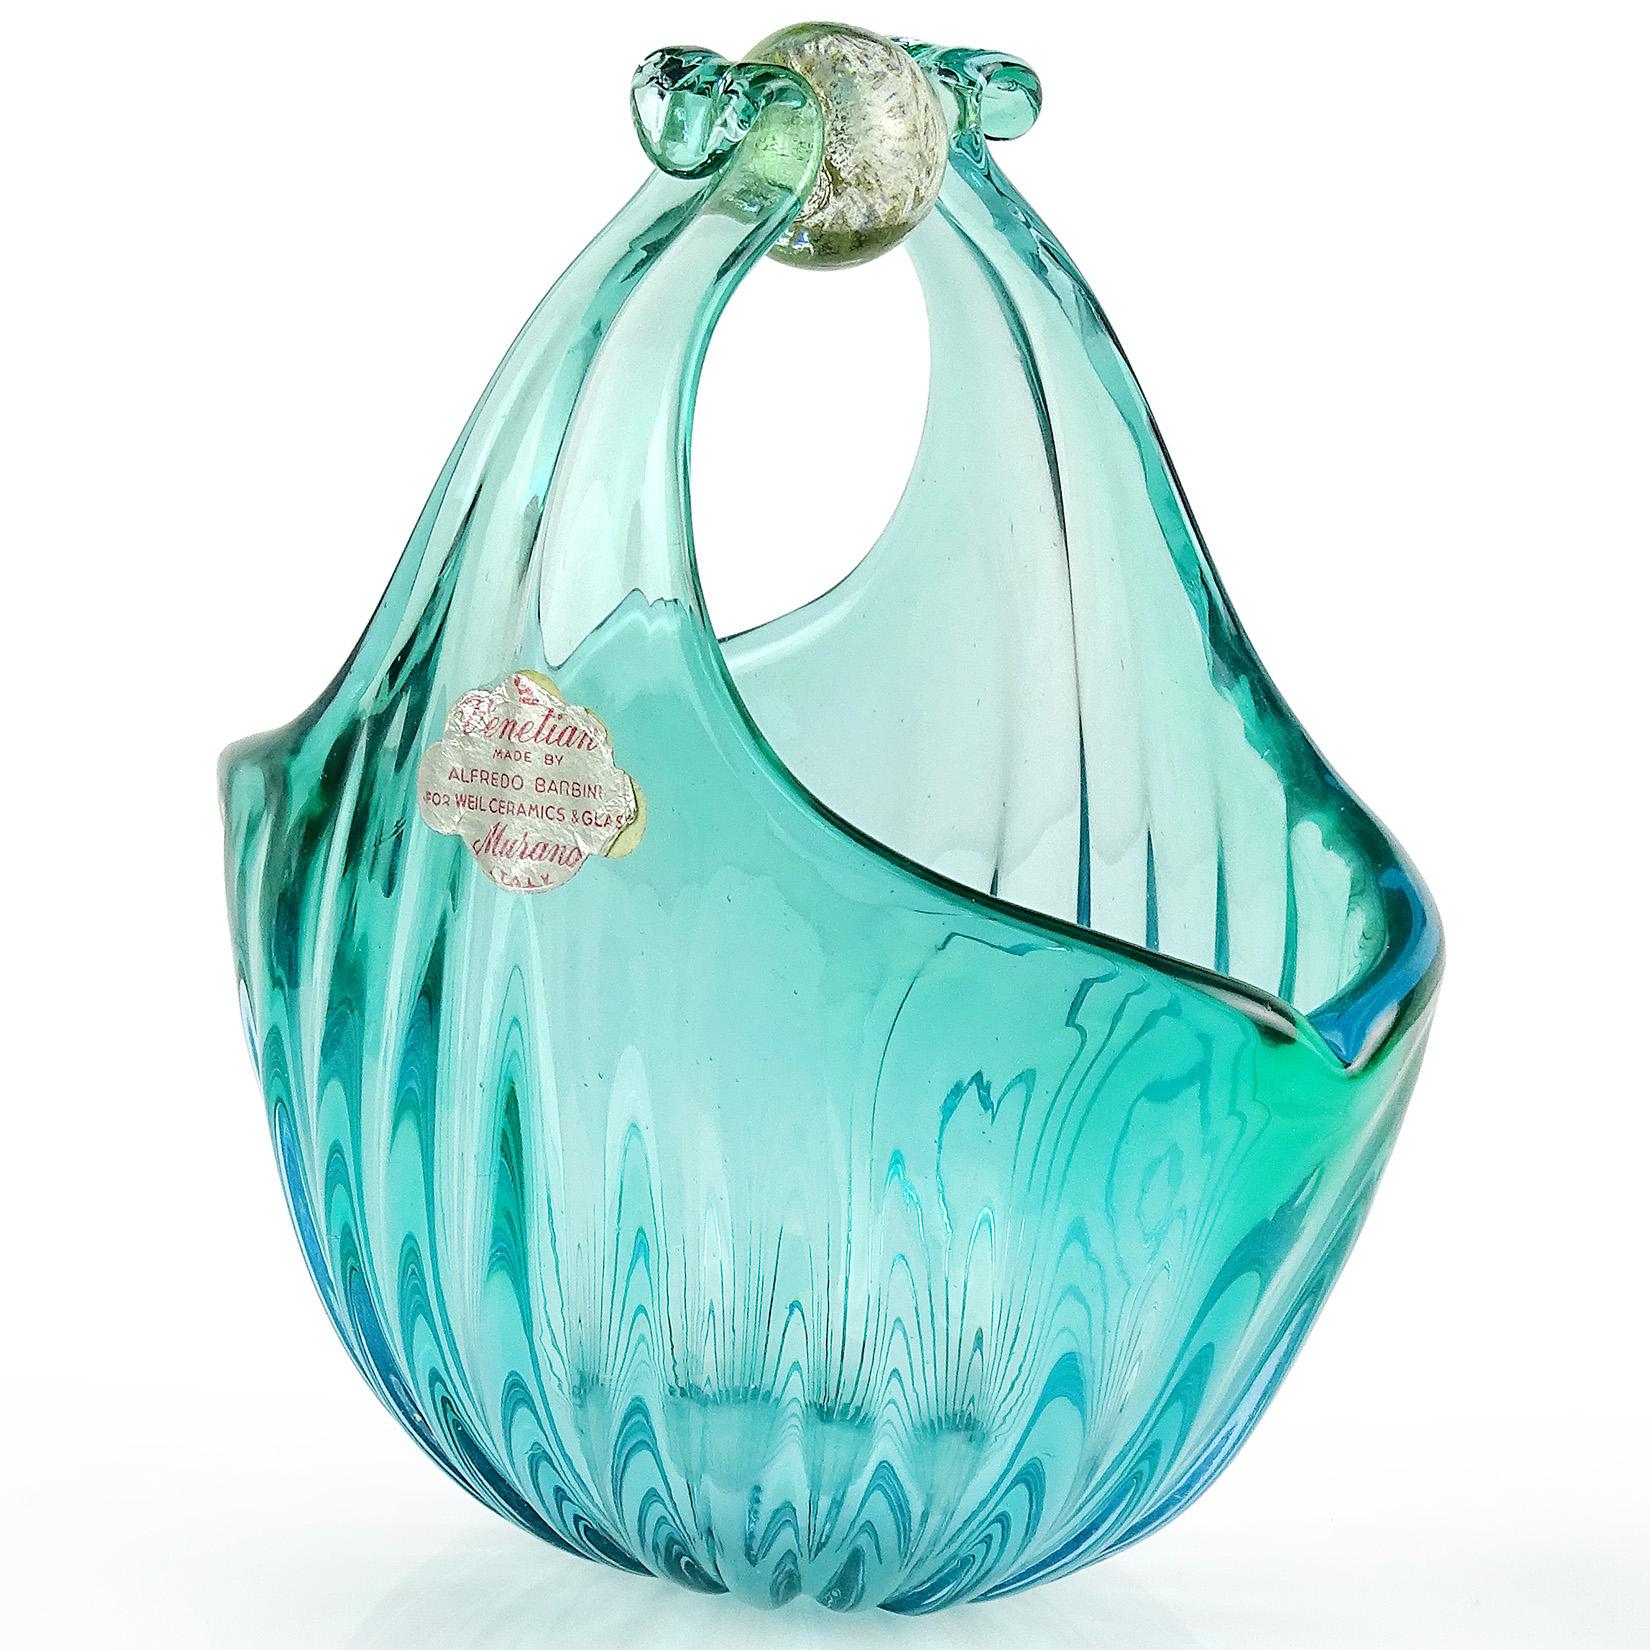 Beautiful vintage Murano hand blown Sommerso aqua blue green and gold flecks Italian art glass flower basket or vase. Documented to designer Alfredo Barbini and published in his catalog, circa 1950-1960. Still retains the original gallery label. It